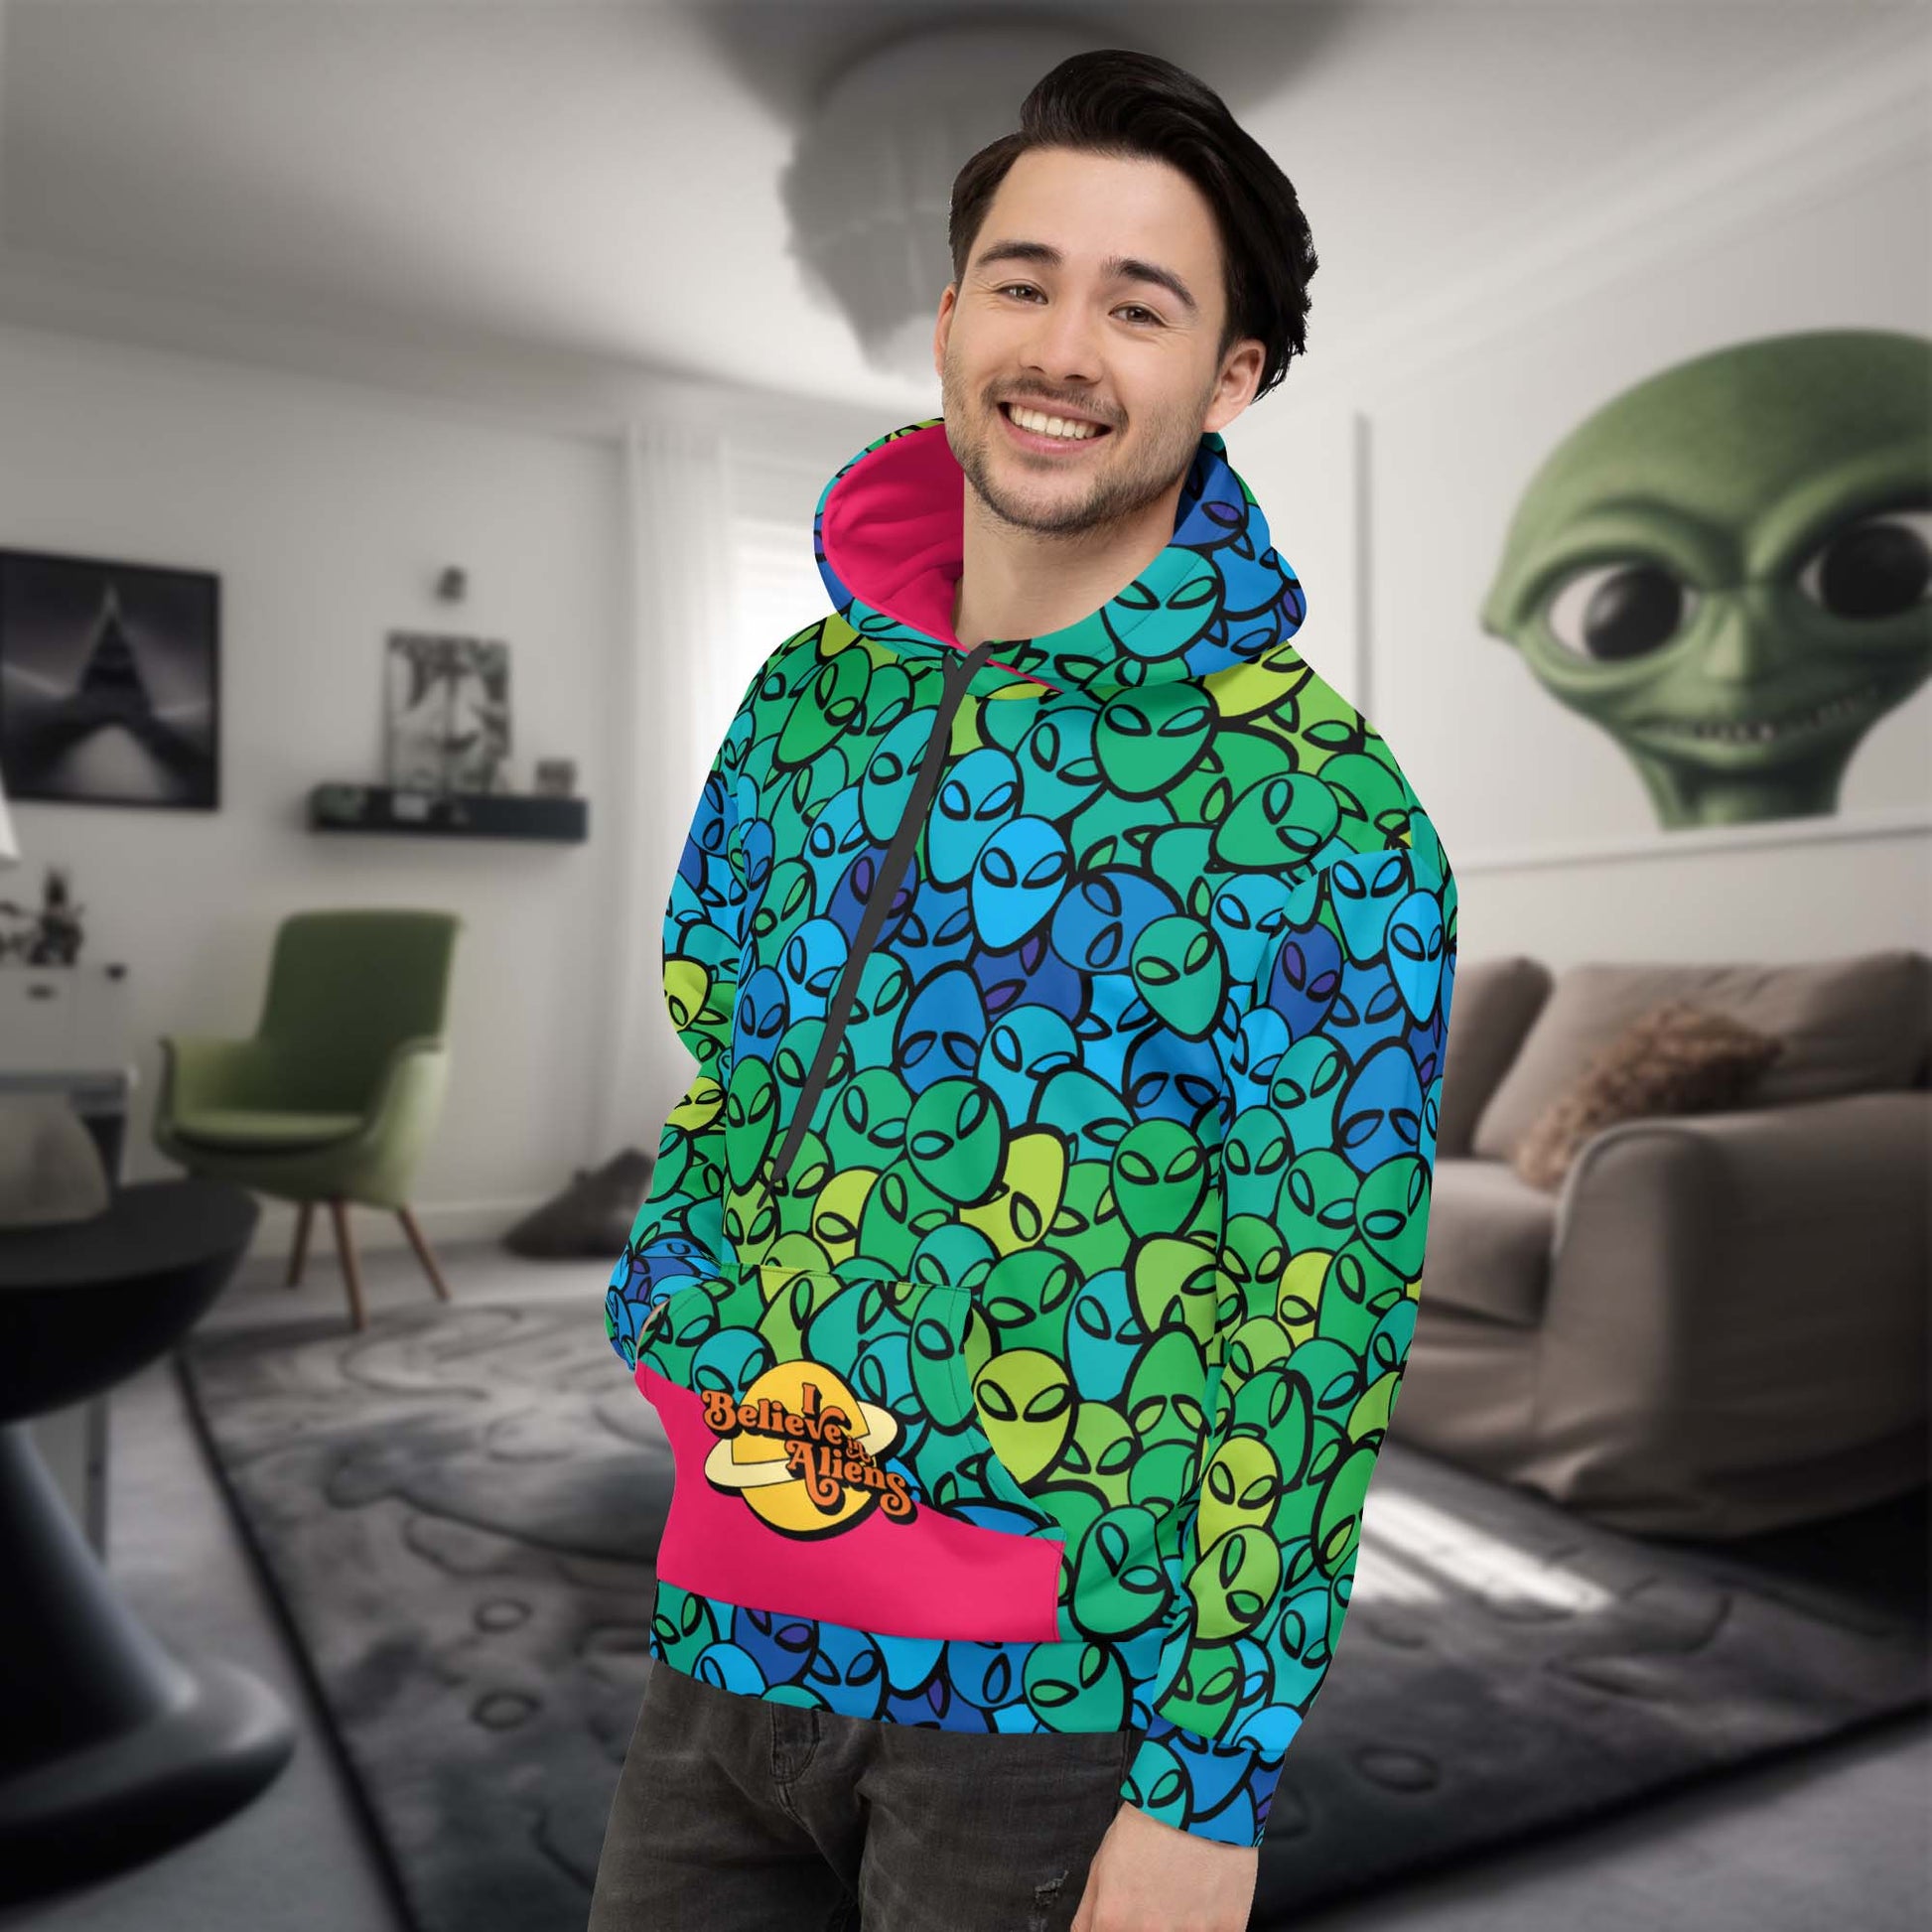 This Alien hoodie is printed all over with aliens. The inside of the hood is bright pink and so is a part of the front pocket. The front pocket has the meme: I believe in Aliens shown on it.